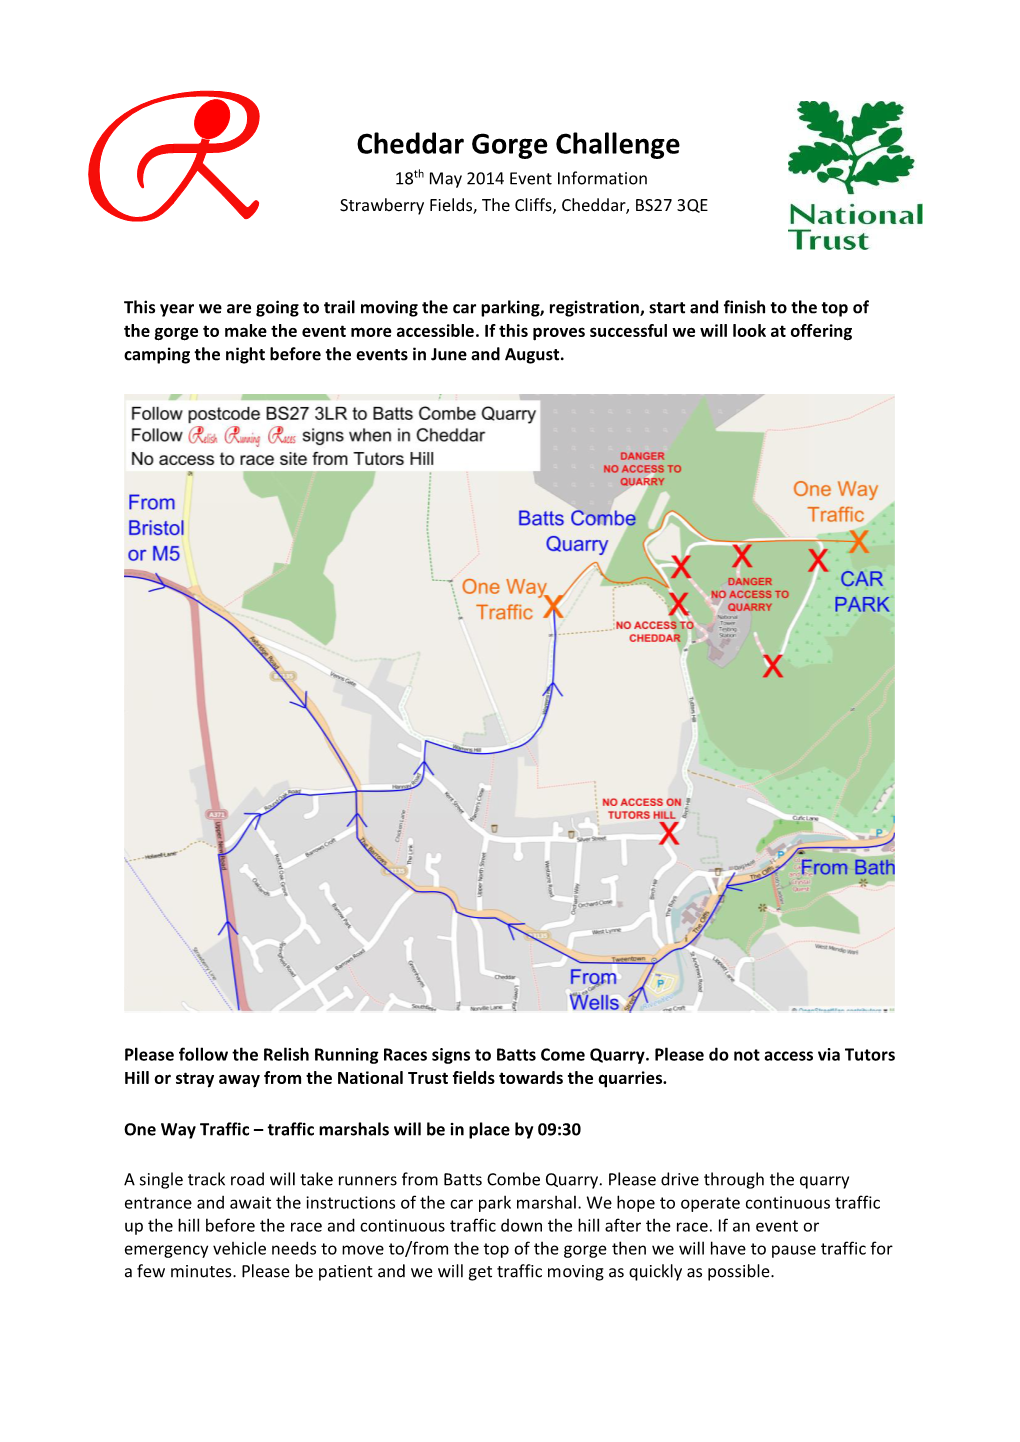 Cheddar Gorge Challenge 18Th May 2014 Event Information Strawberry Fields, the Cliffs, Cheddar, BS27 3QE